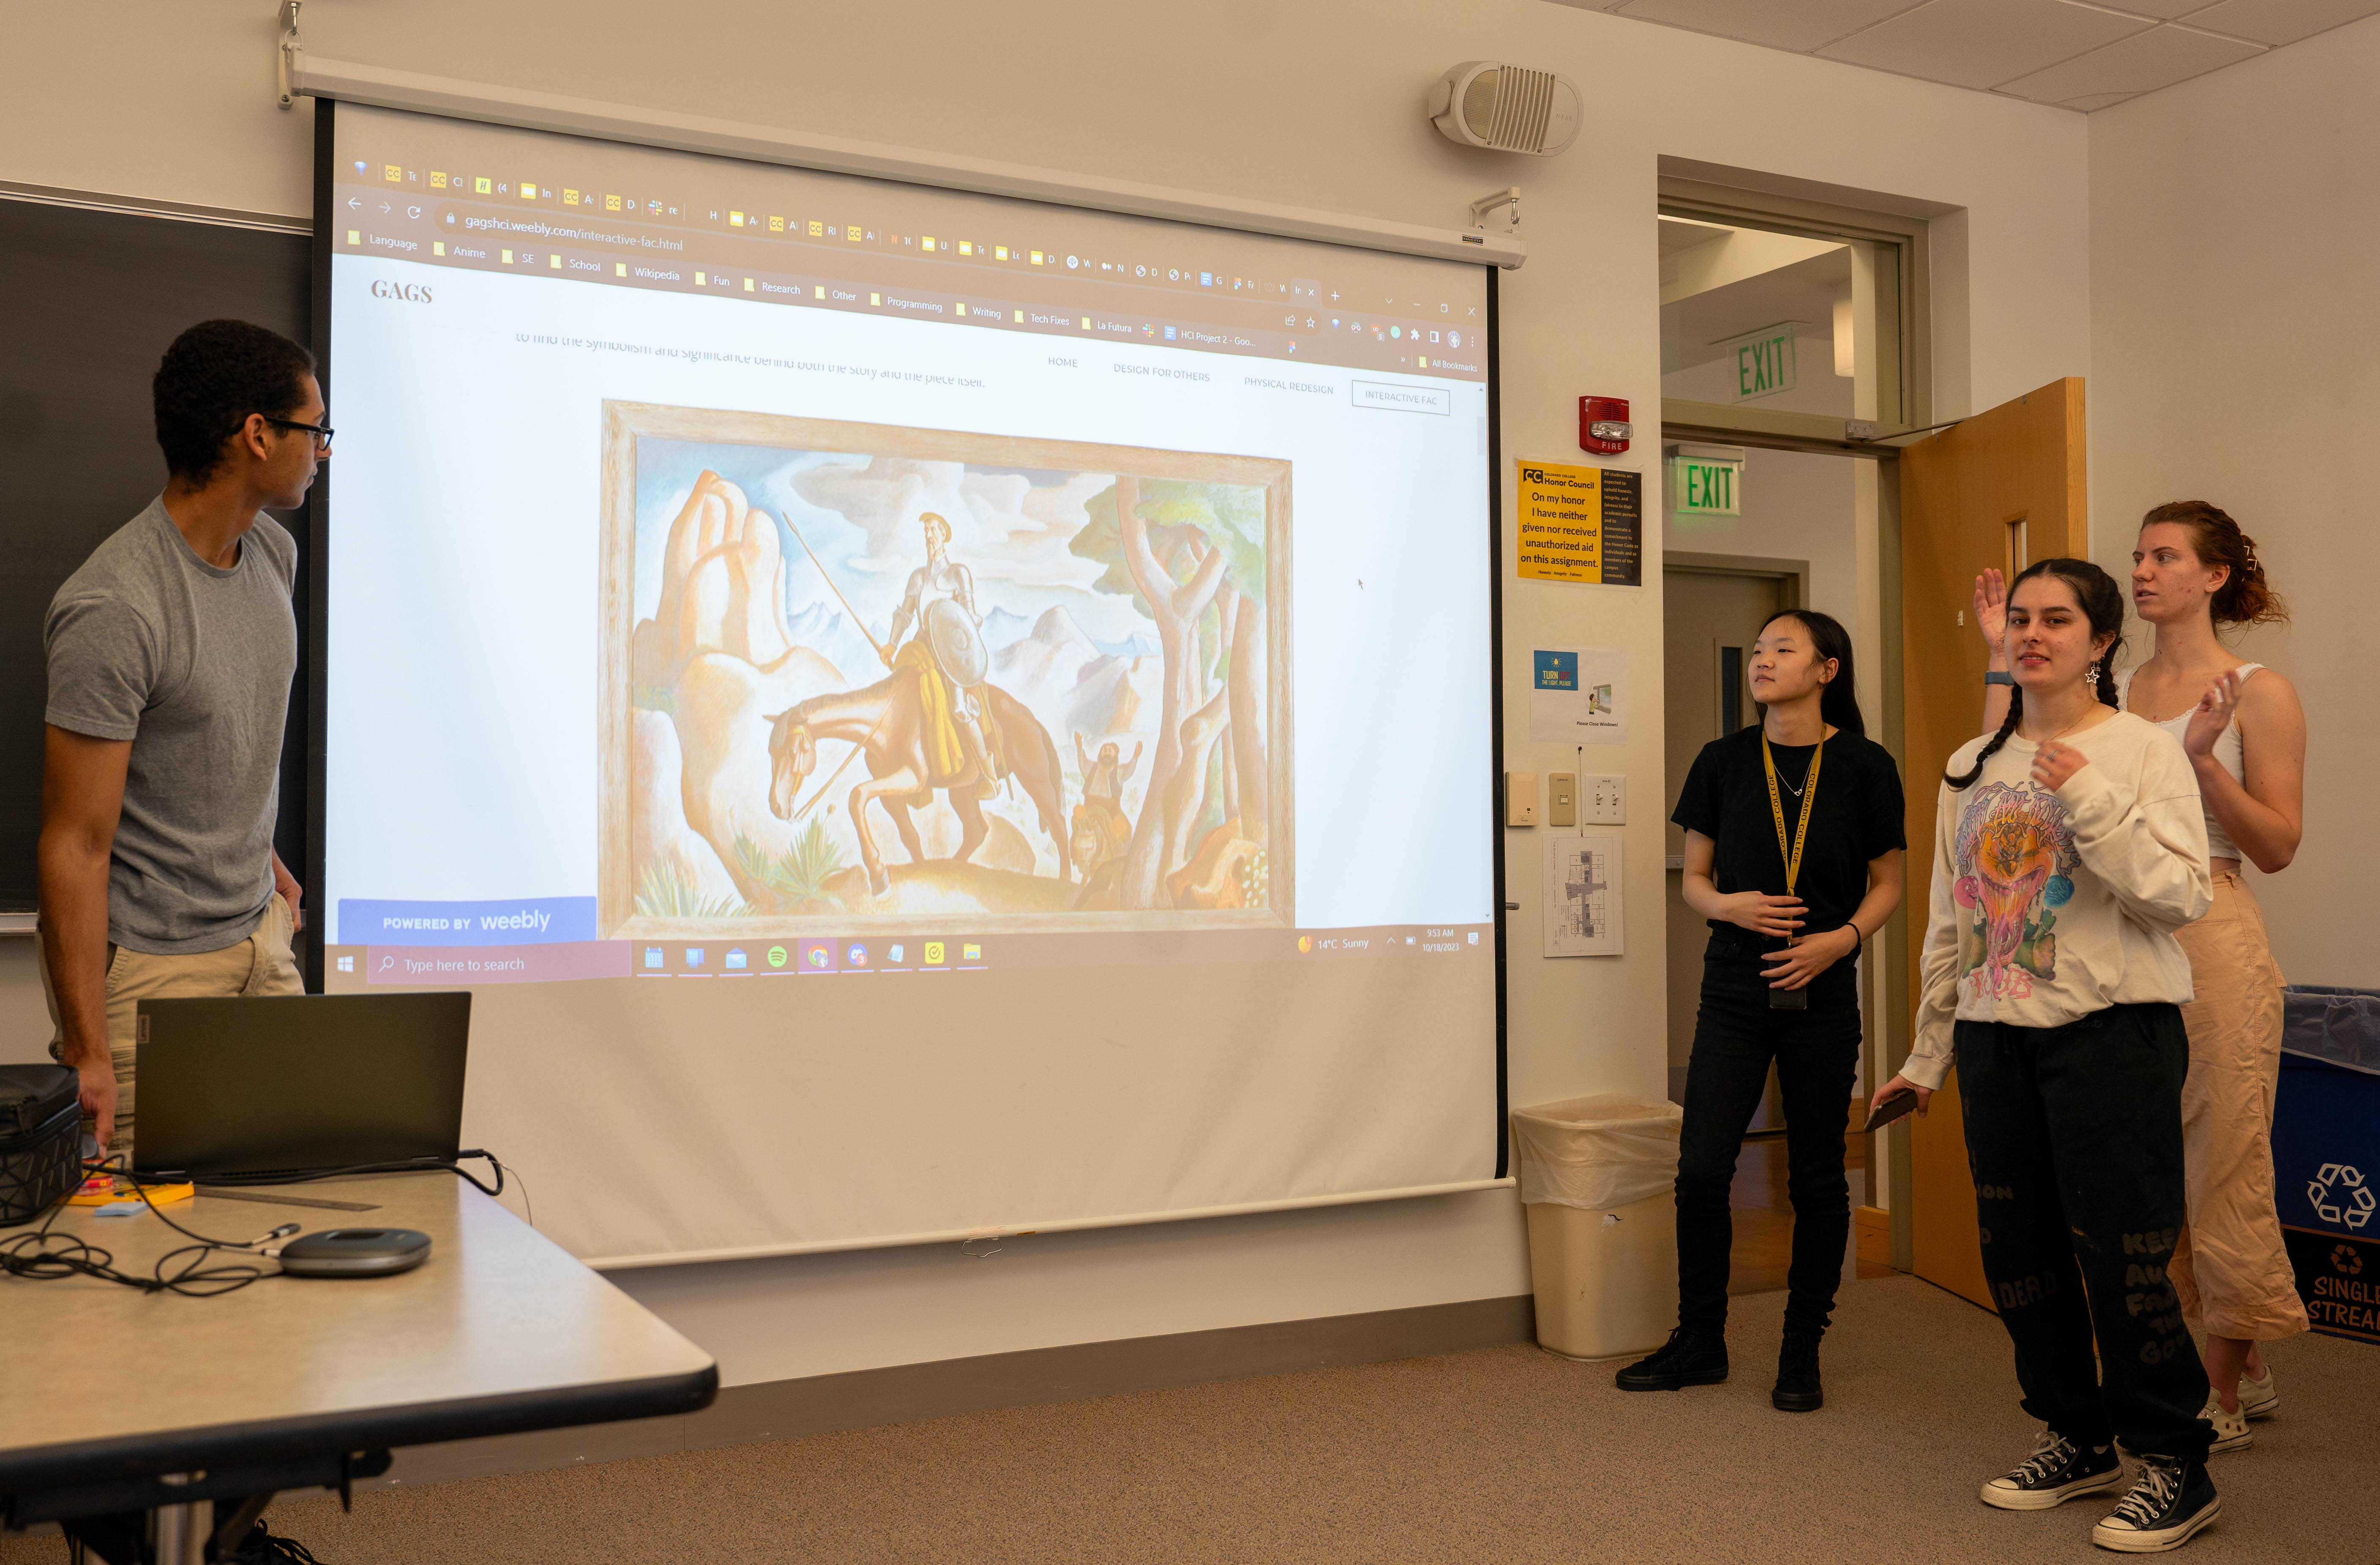 Silas Blinch '25, Alisha Bloom '24, Grace Ivaska '24, and Gwen Hardwick '24 present their final project in Dr. Varsha Koushik's Foundations of Human-Centered Computing during Block 2.